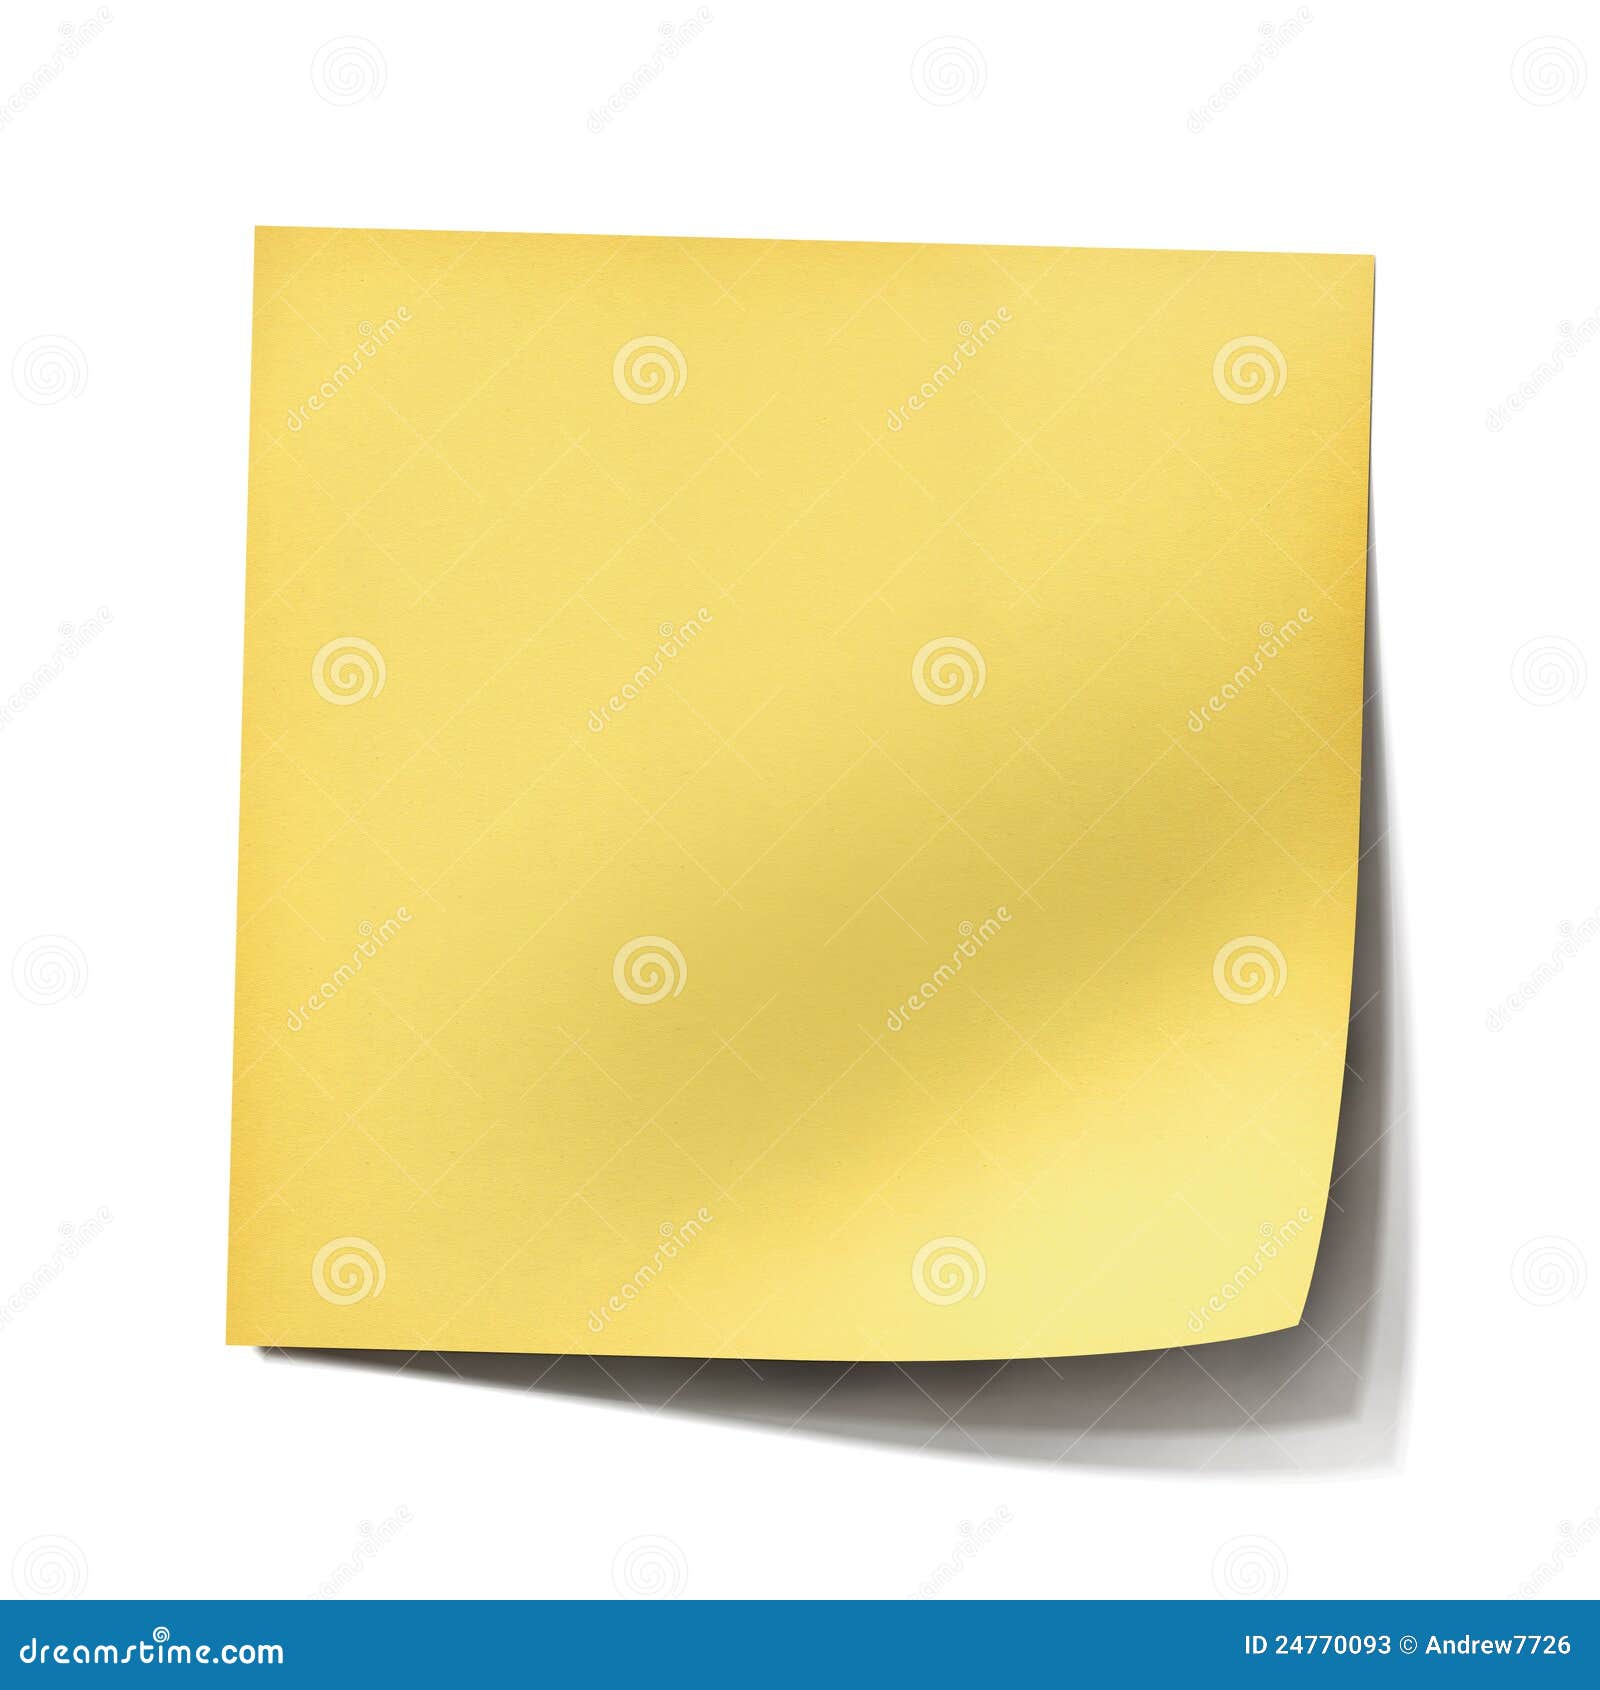 yellow post it note